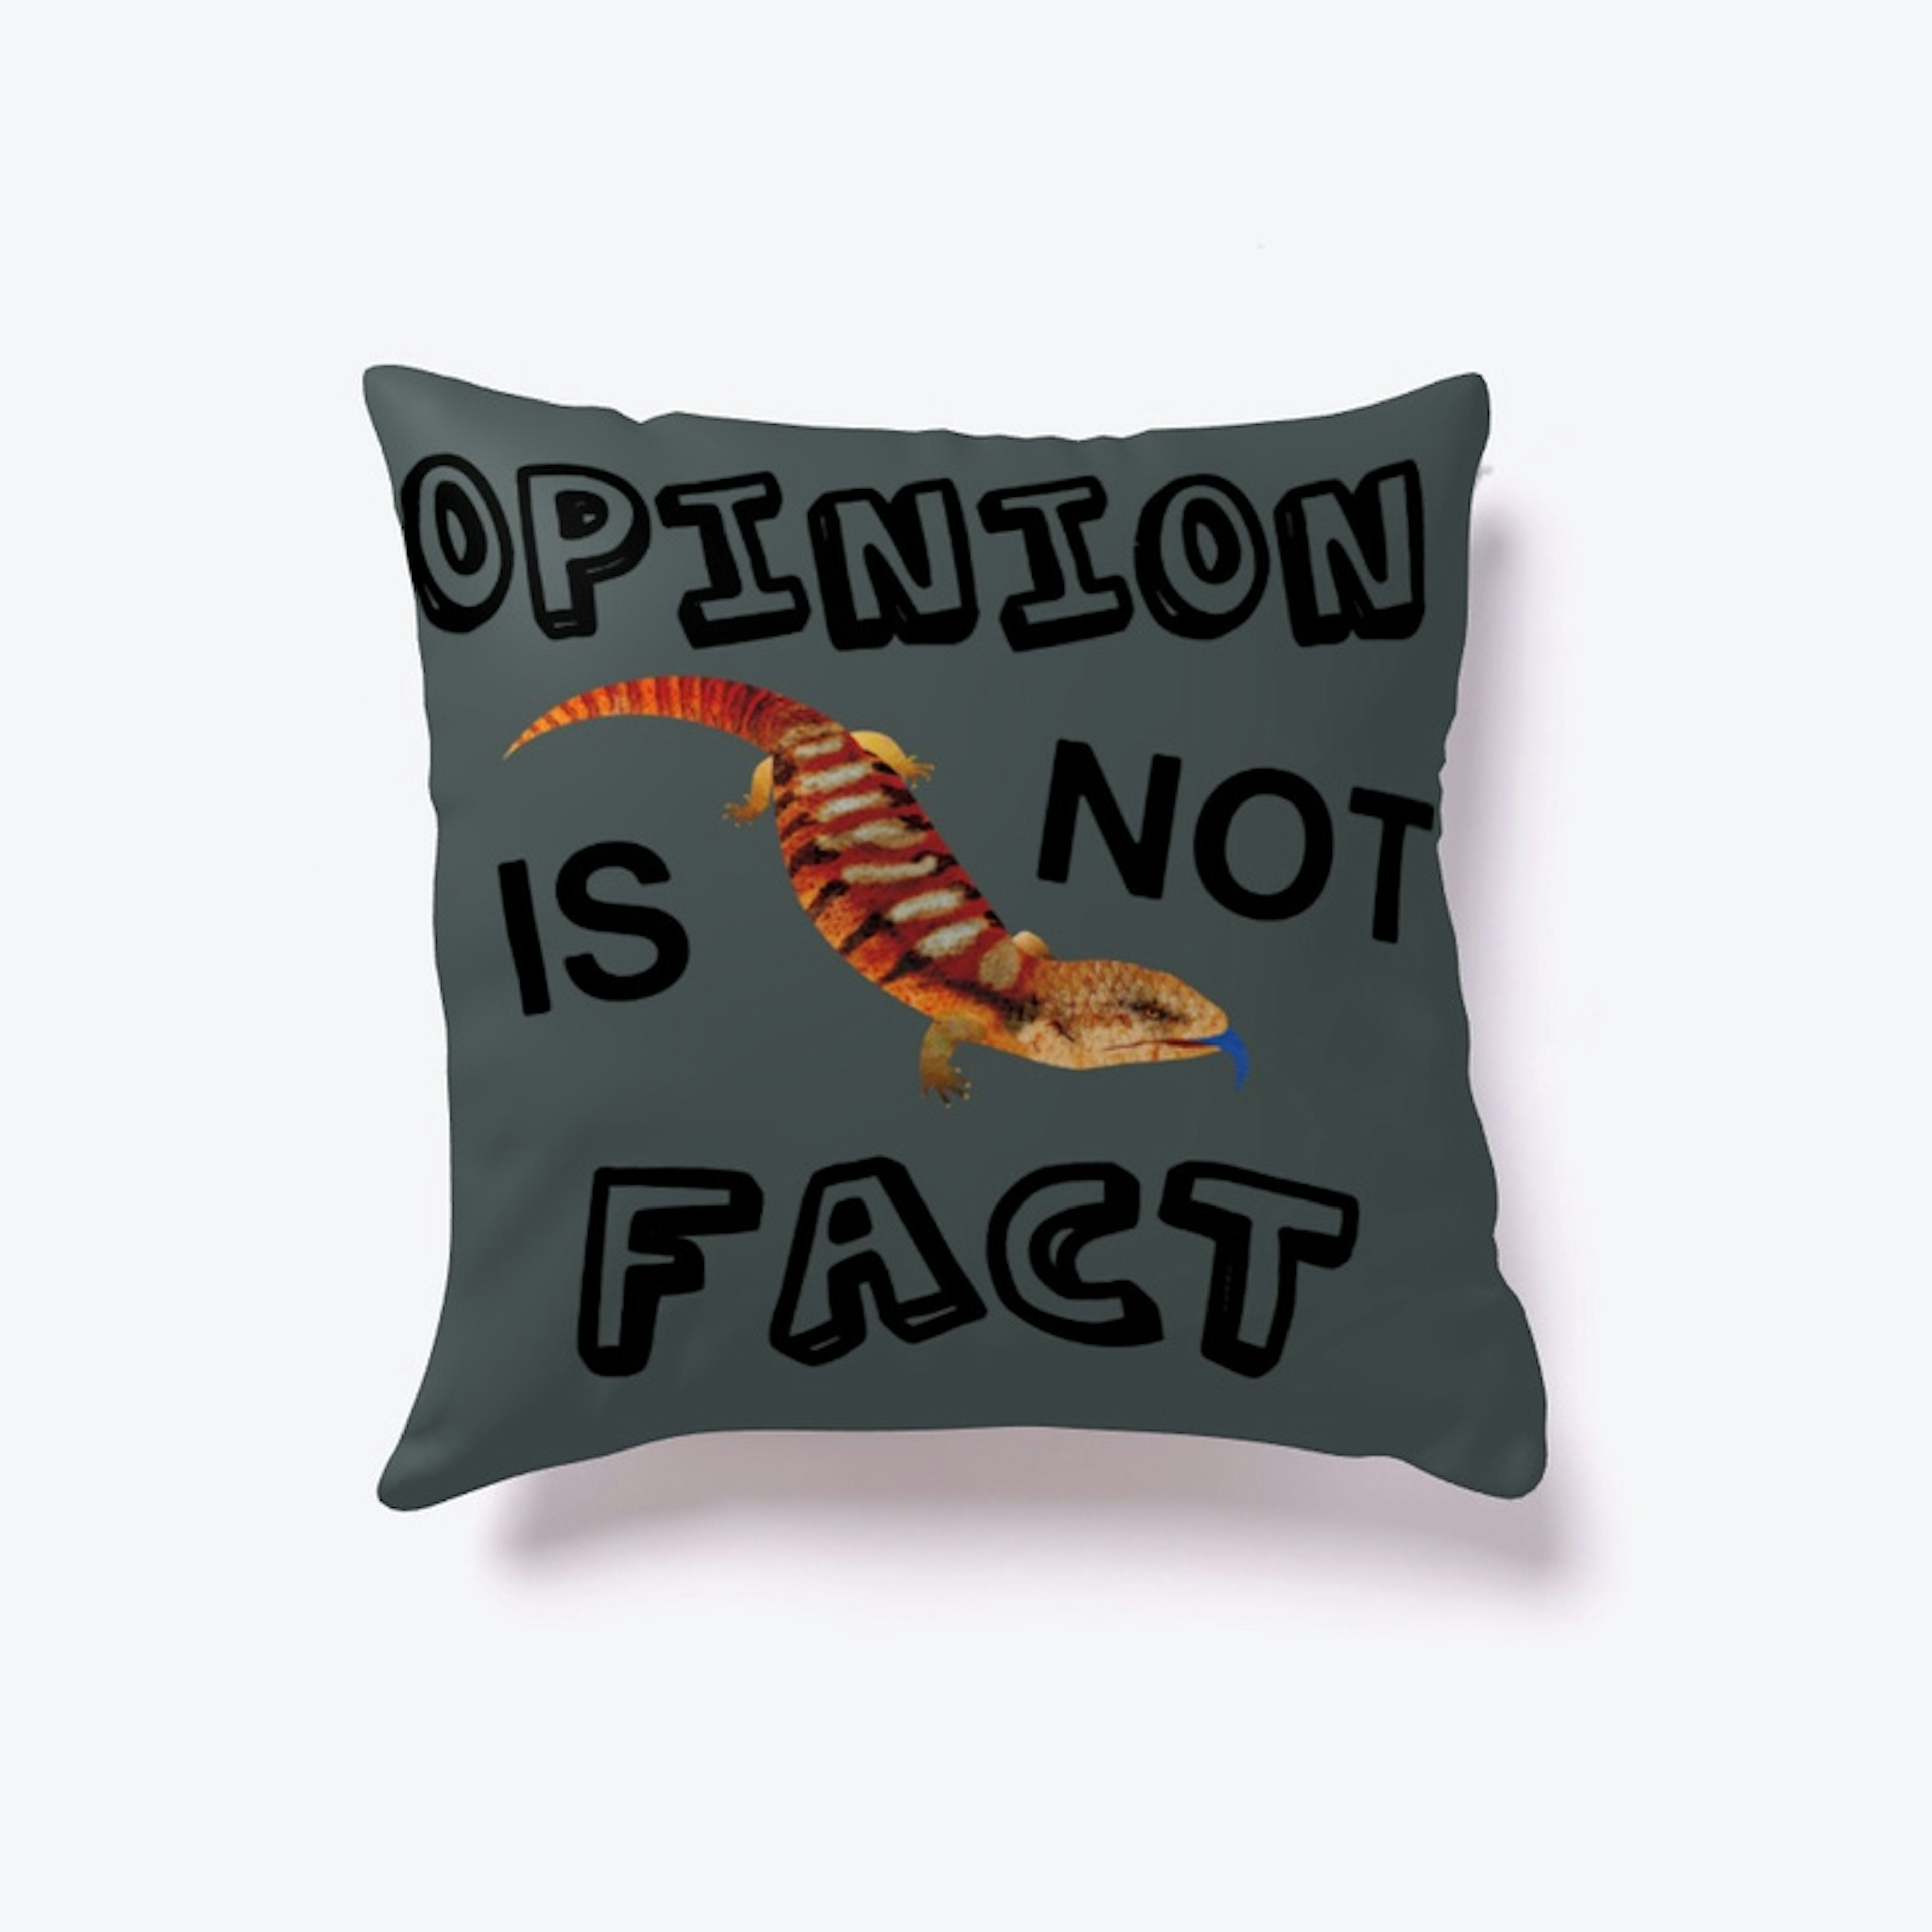 Opinion is NOT Fact!